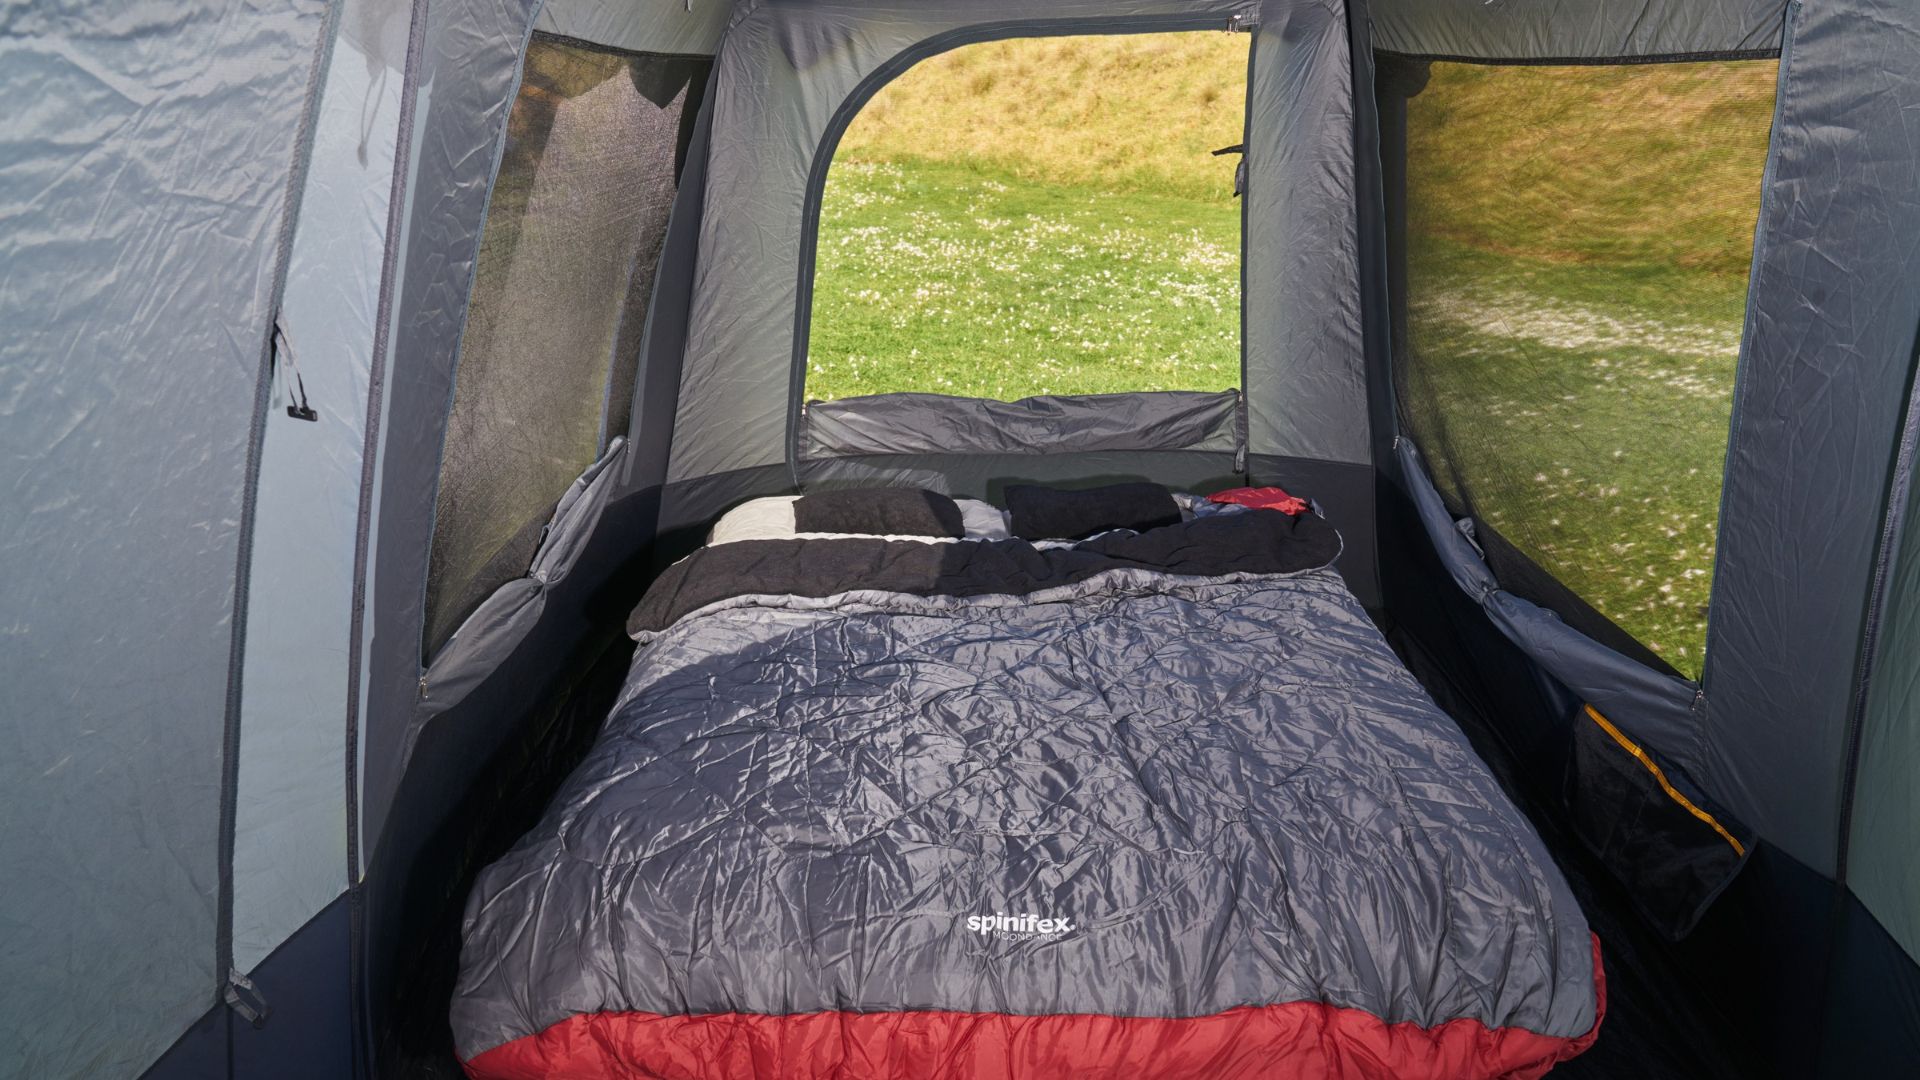 Internal view of Spinifex Moondance 0° Queen Sleeping Bag in a Spinifex Mawson Eclipse™ 8 Person Tent